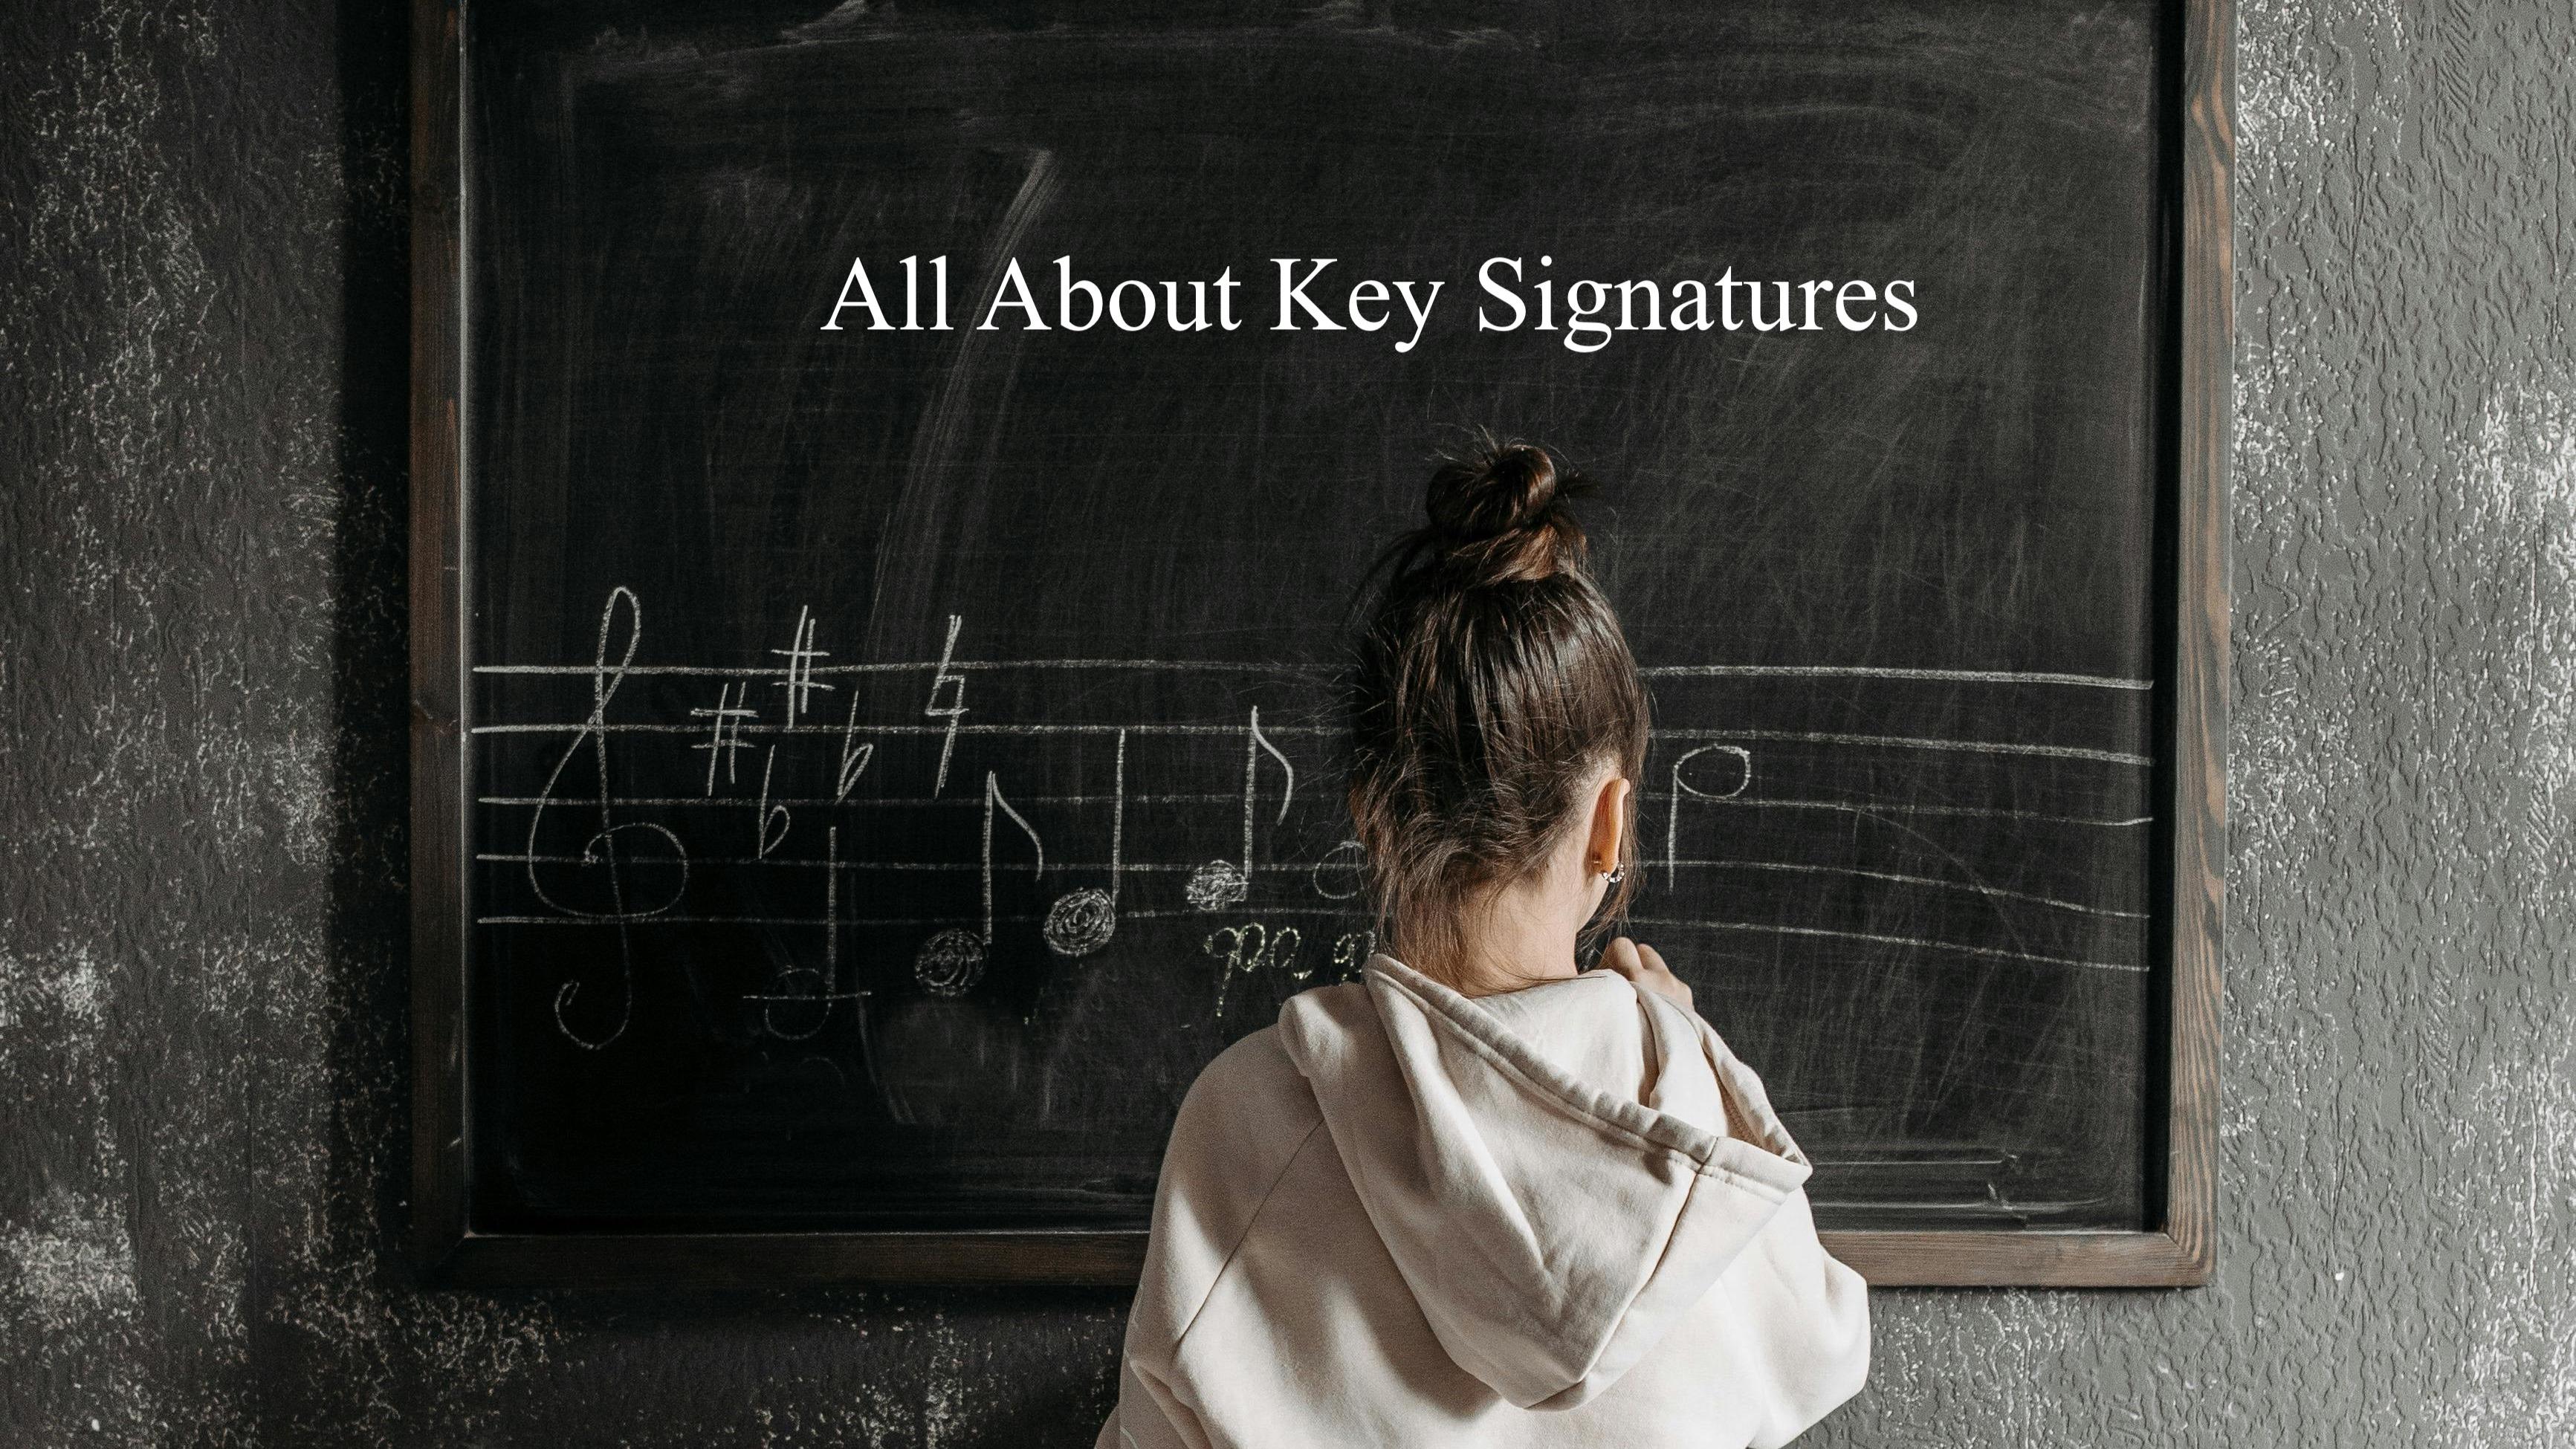 All About Key Signatures